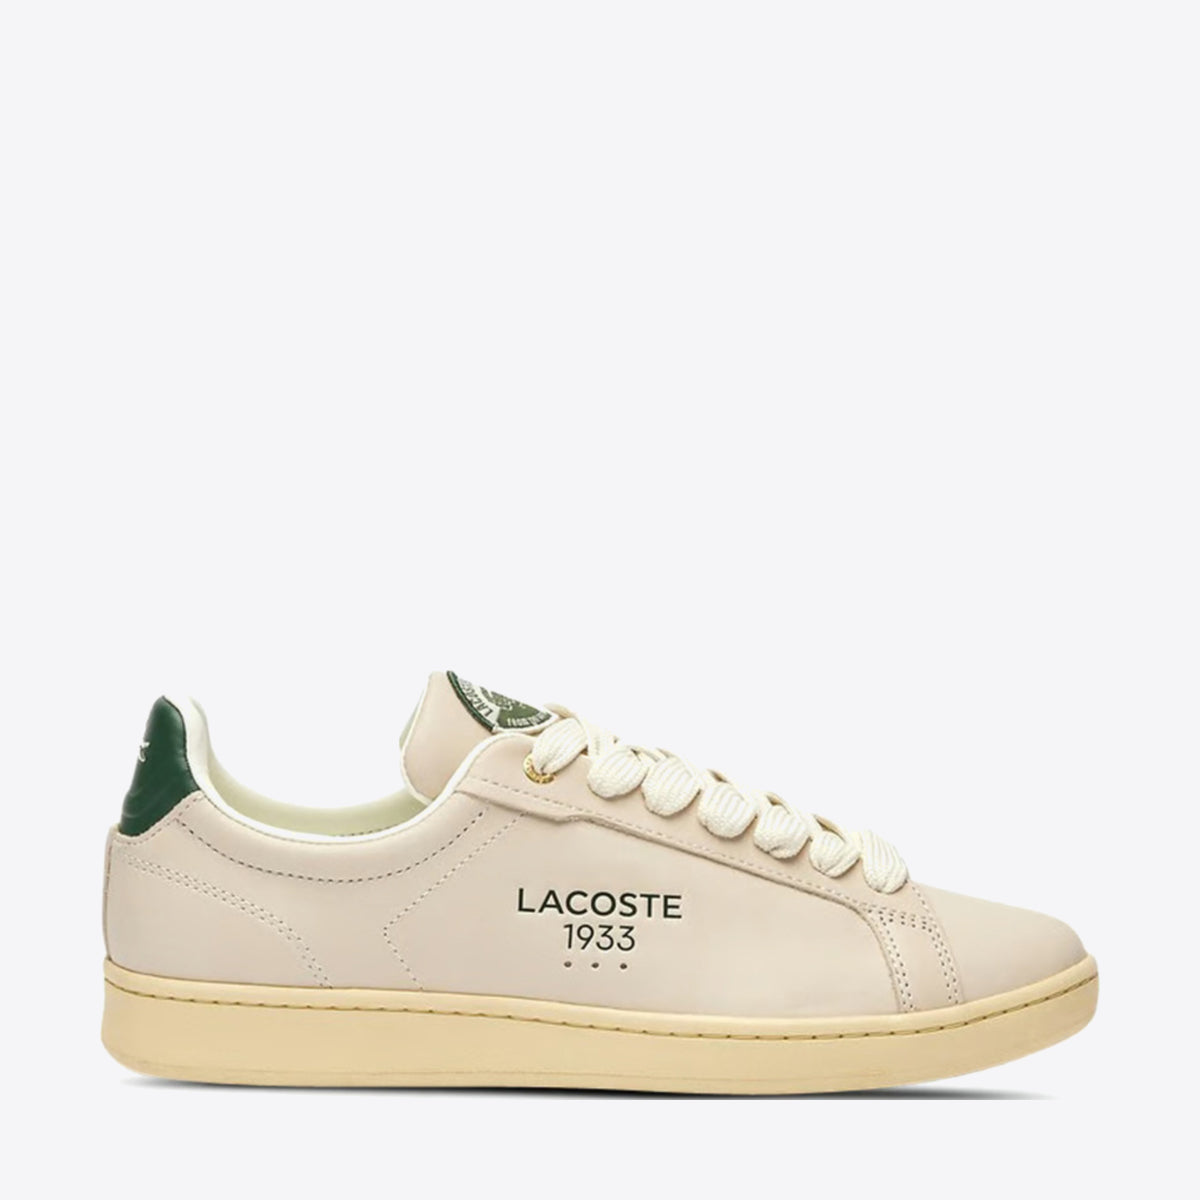 LACOSTE Carnaby Pro 2235 Off White/Green - Image 1